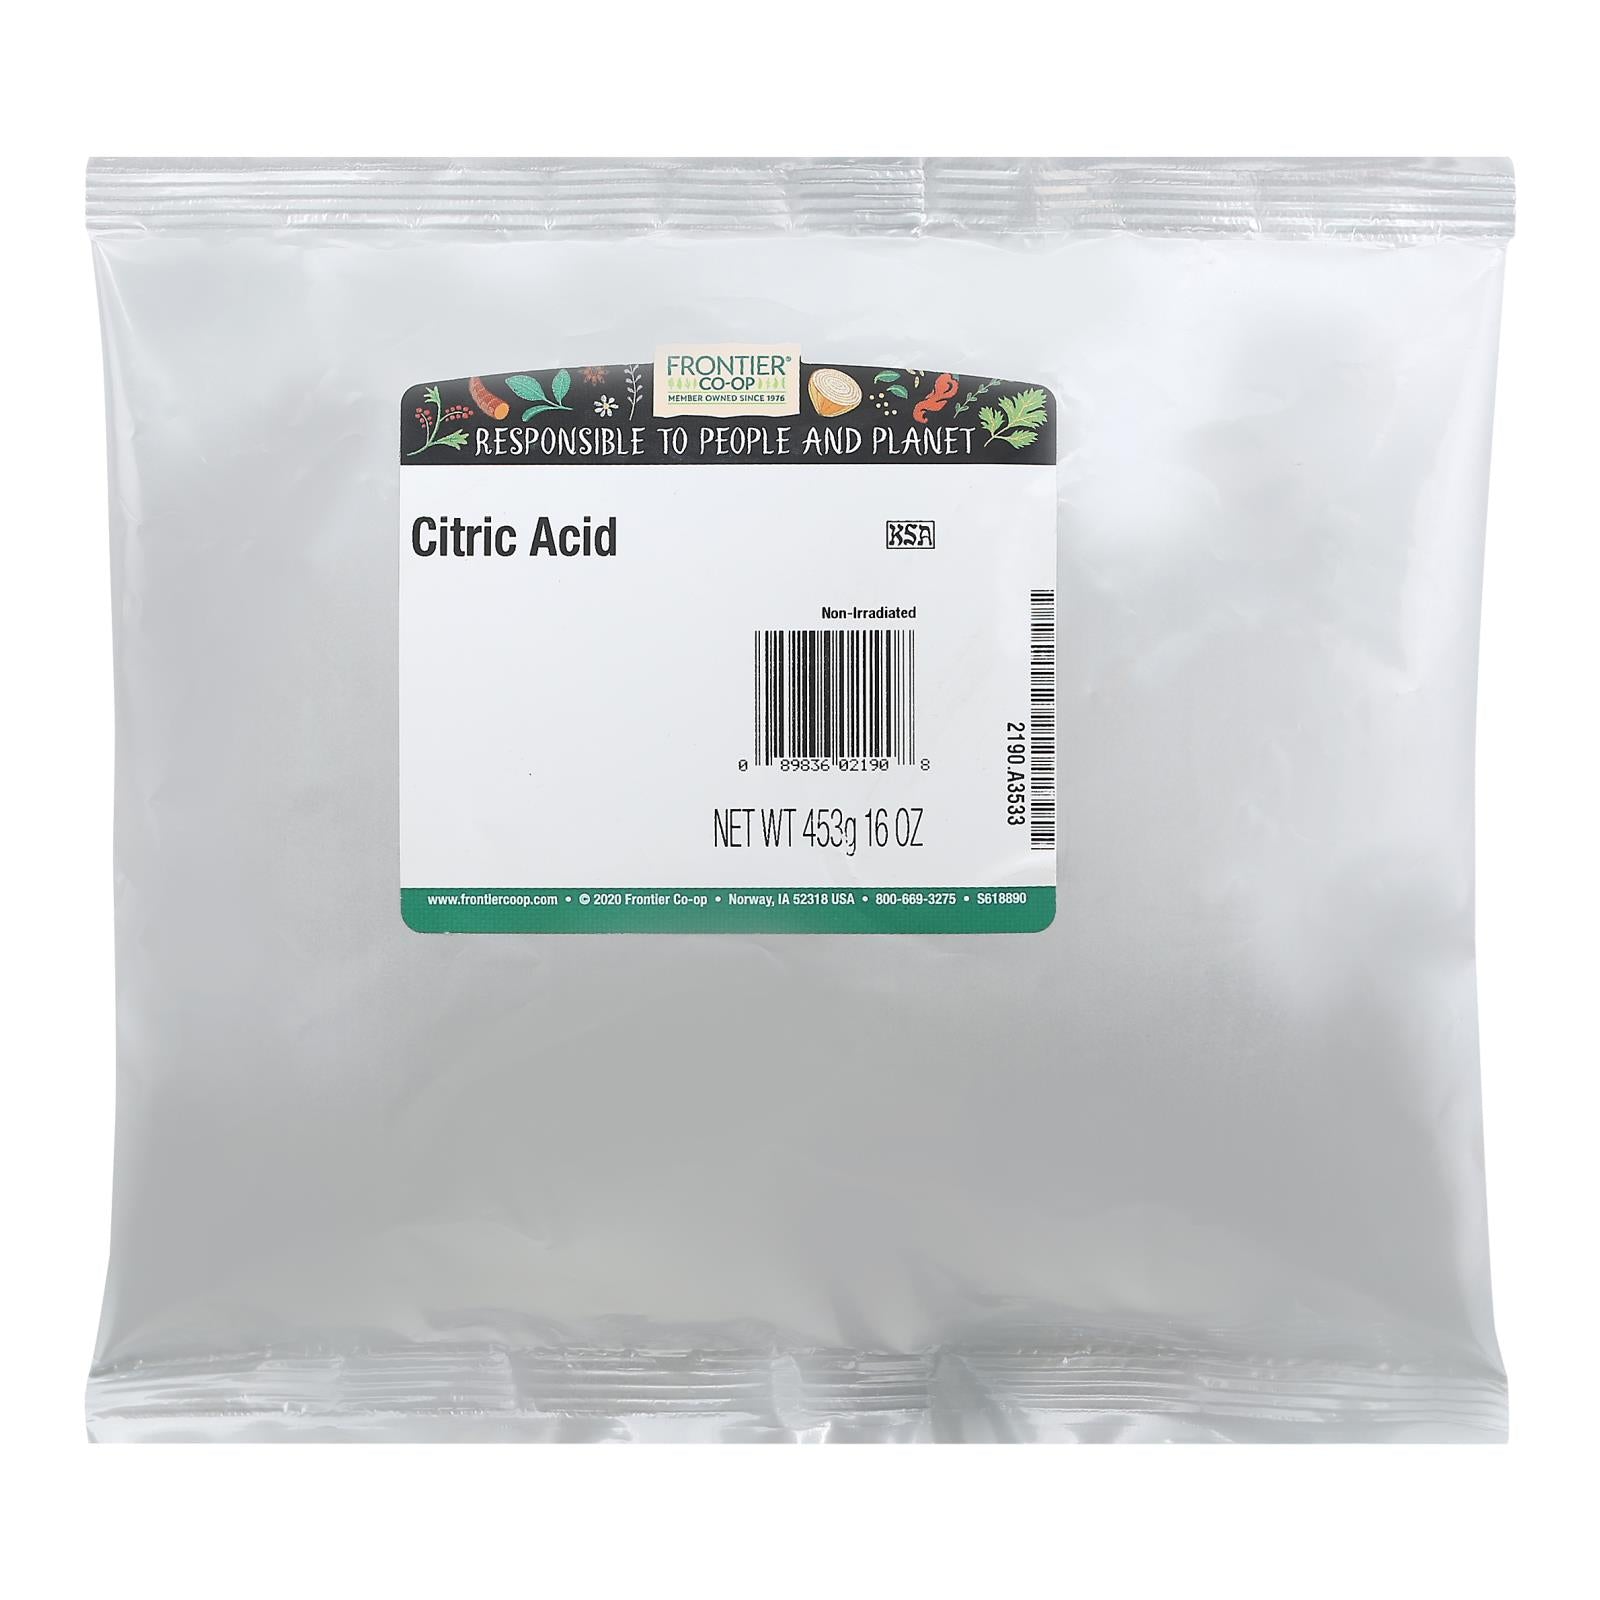 Frontier Herb - Citric Acid - 1 Each - 1 #